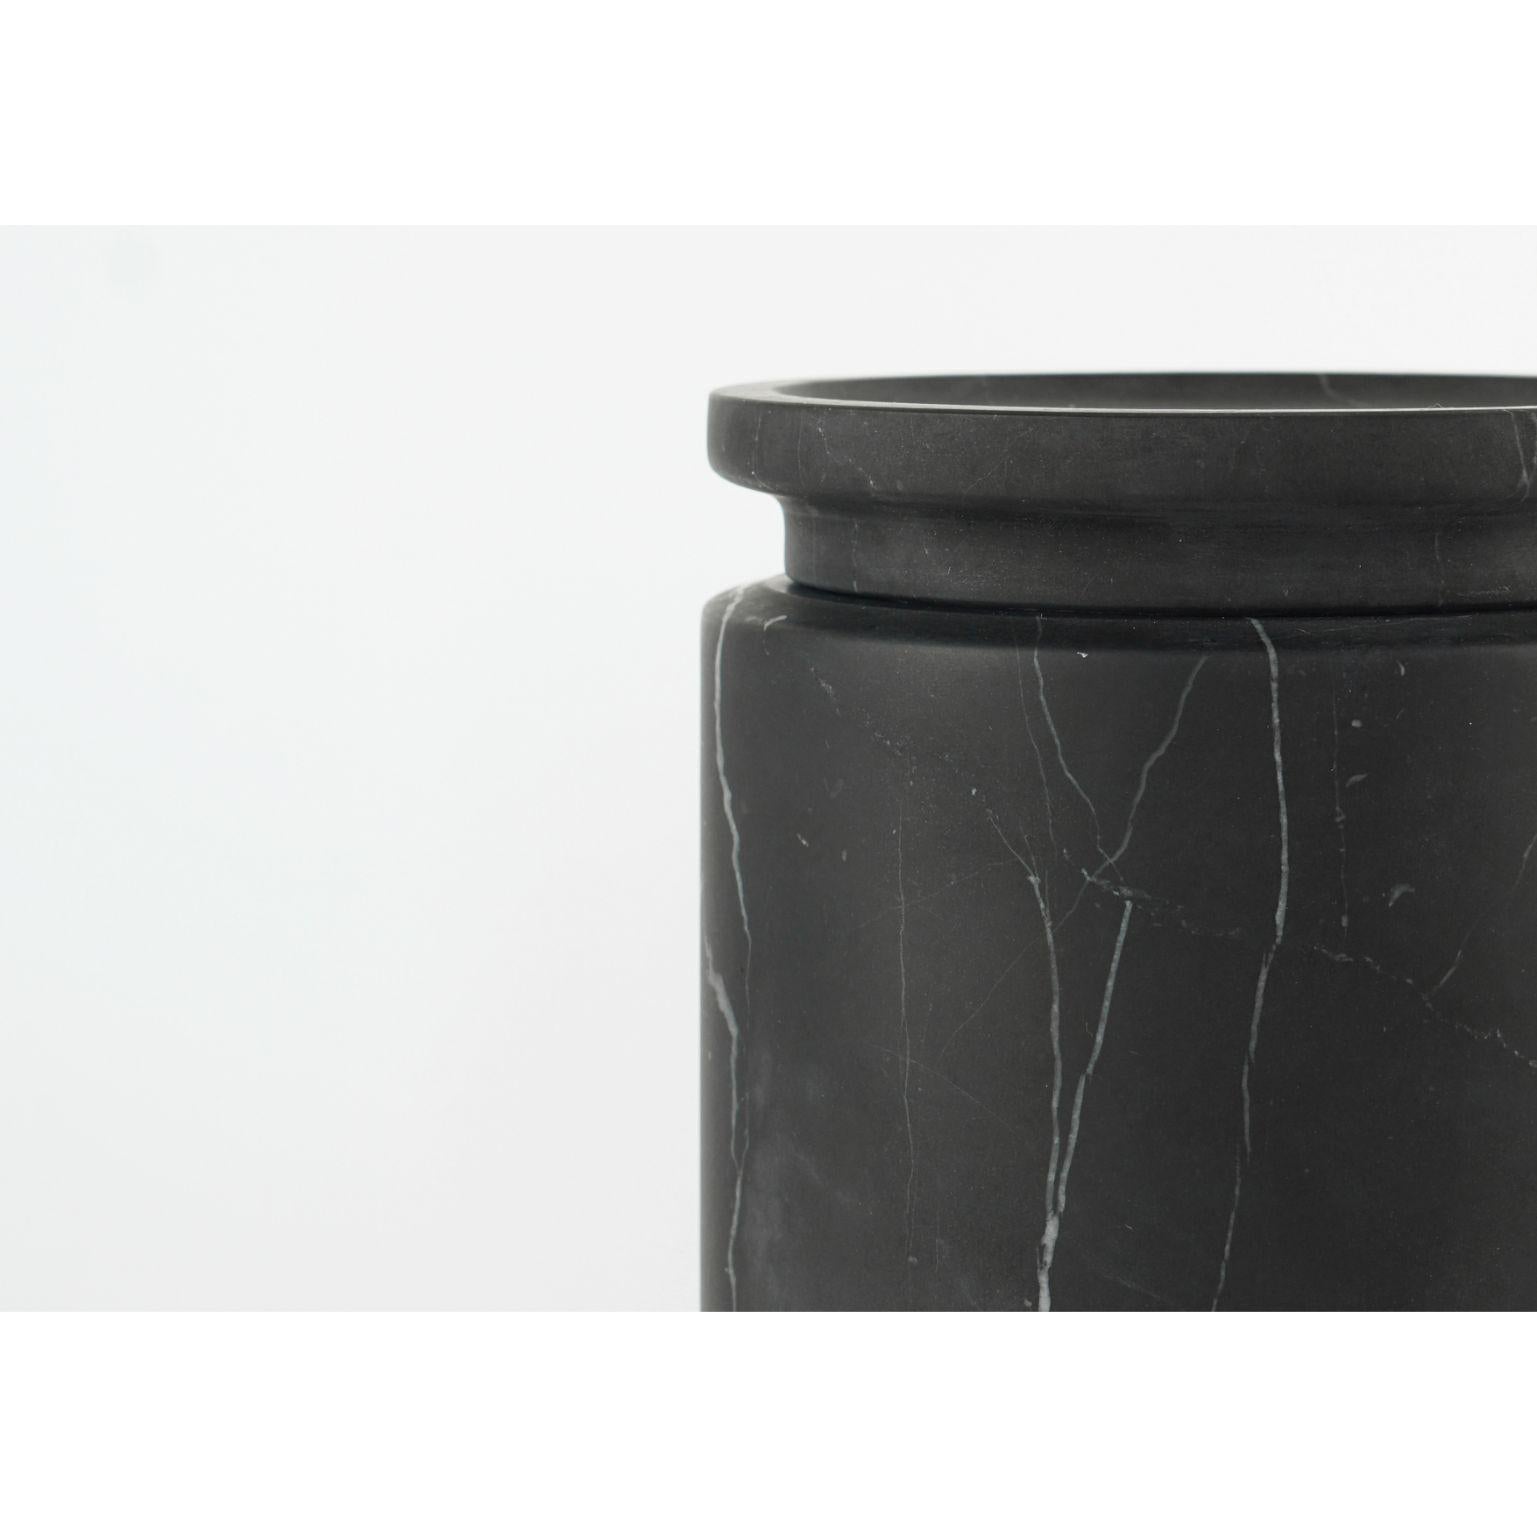 Pyxis - large pot - black by Ivan Colominas
Pyxis Collection
Dimensions: 12.6 x 19 cm
Materials: Nero Marquinia

Also available: Bianco Michelangelo, Small & Medium.

A refined collection articulated through cylinders that vary only in size